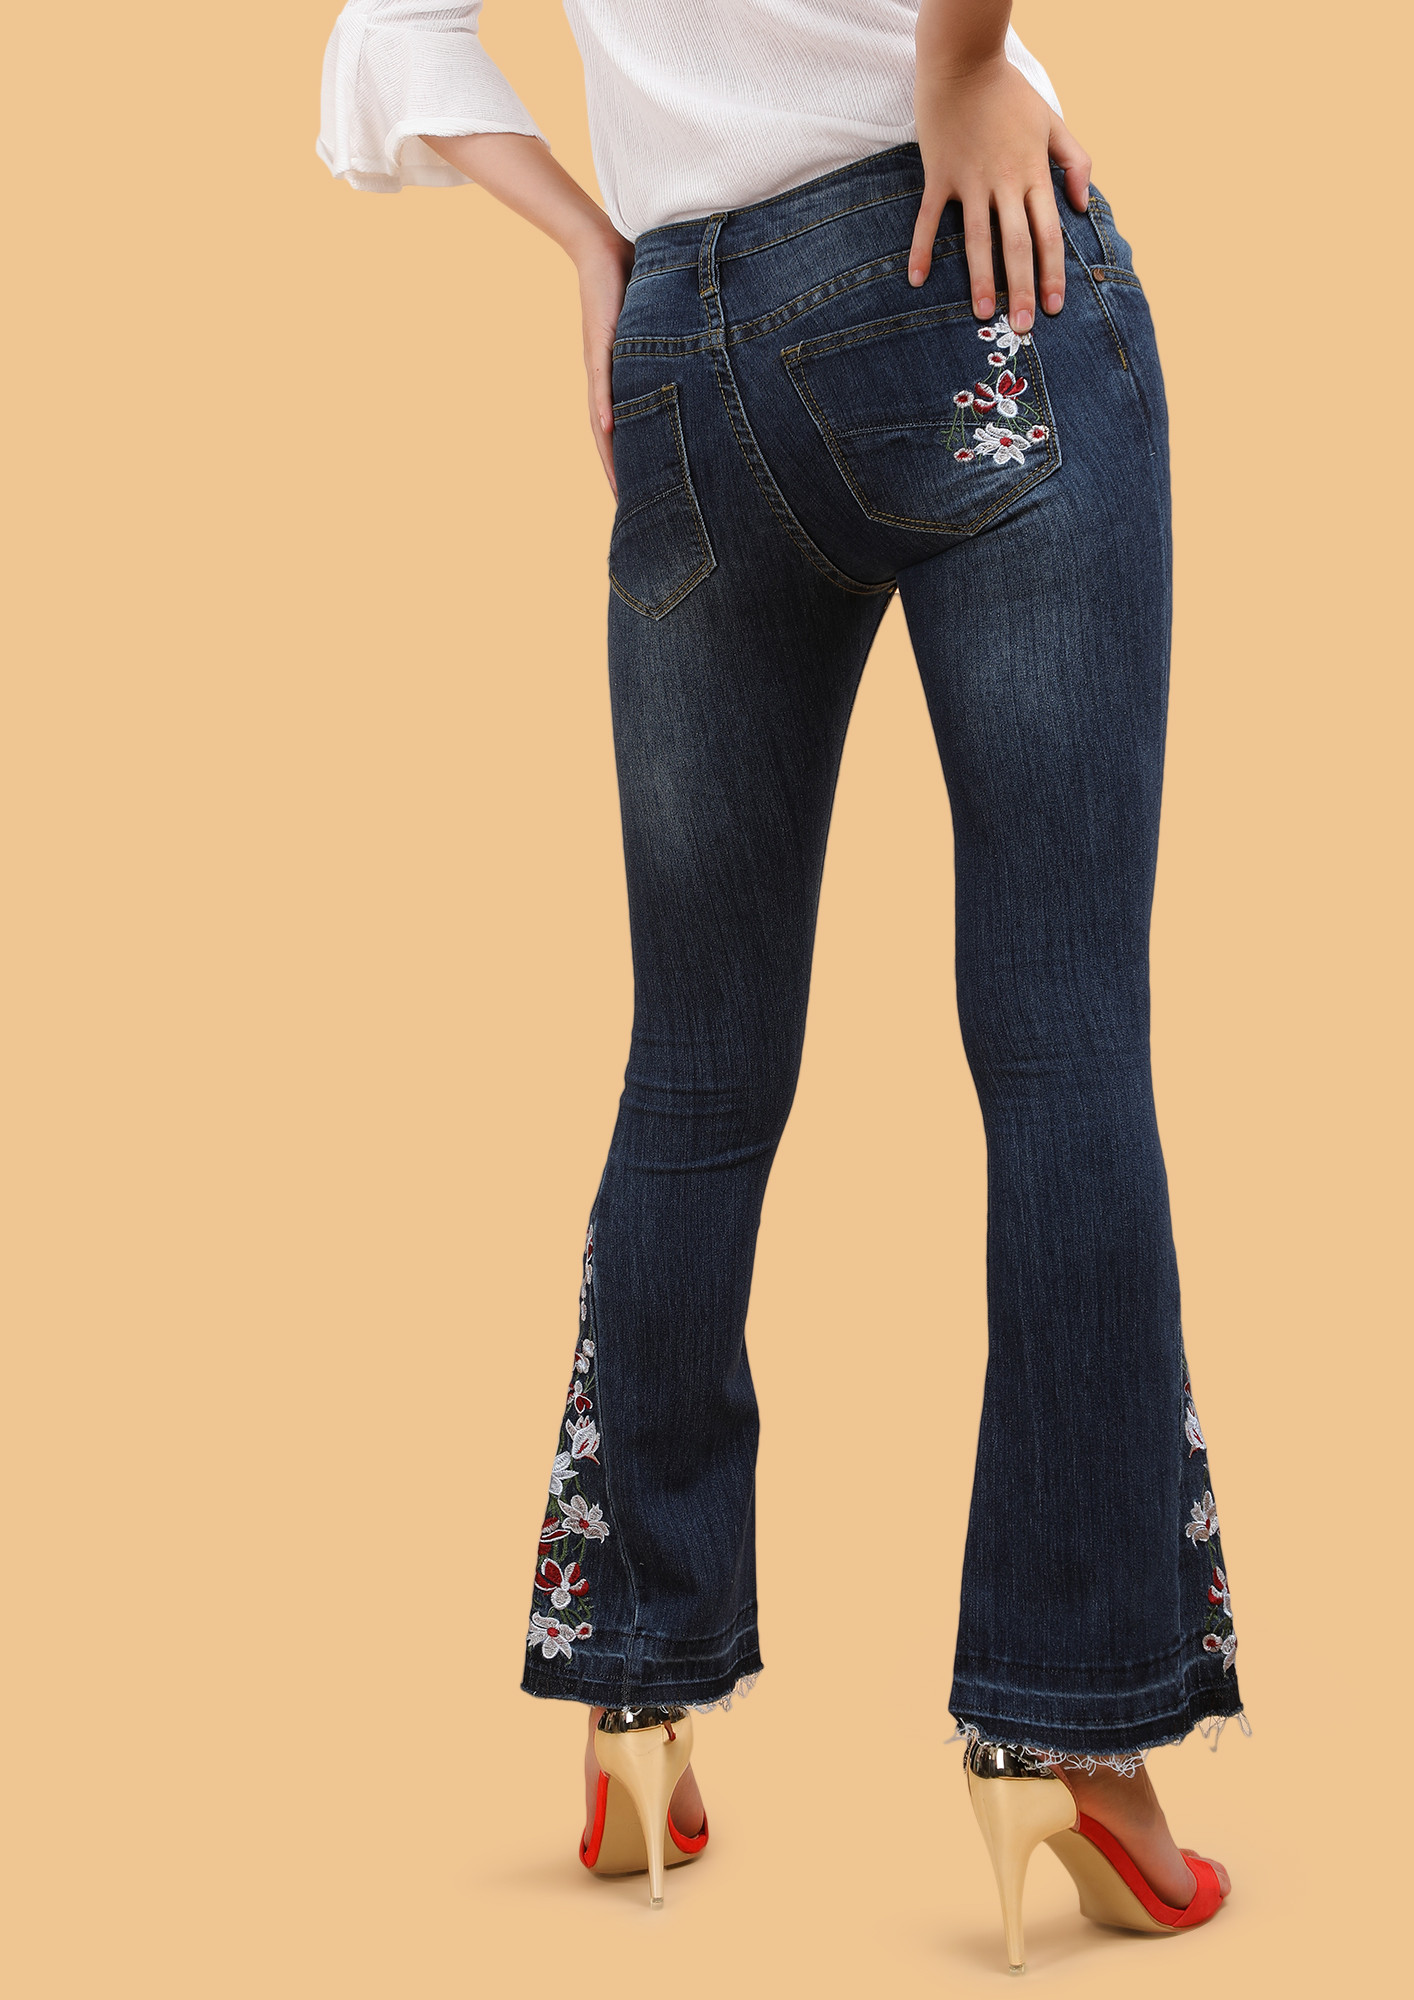 TALE OF A FLORAL TRAIL BLUE BOOTCUT JEANS